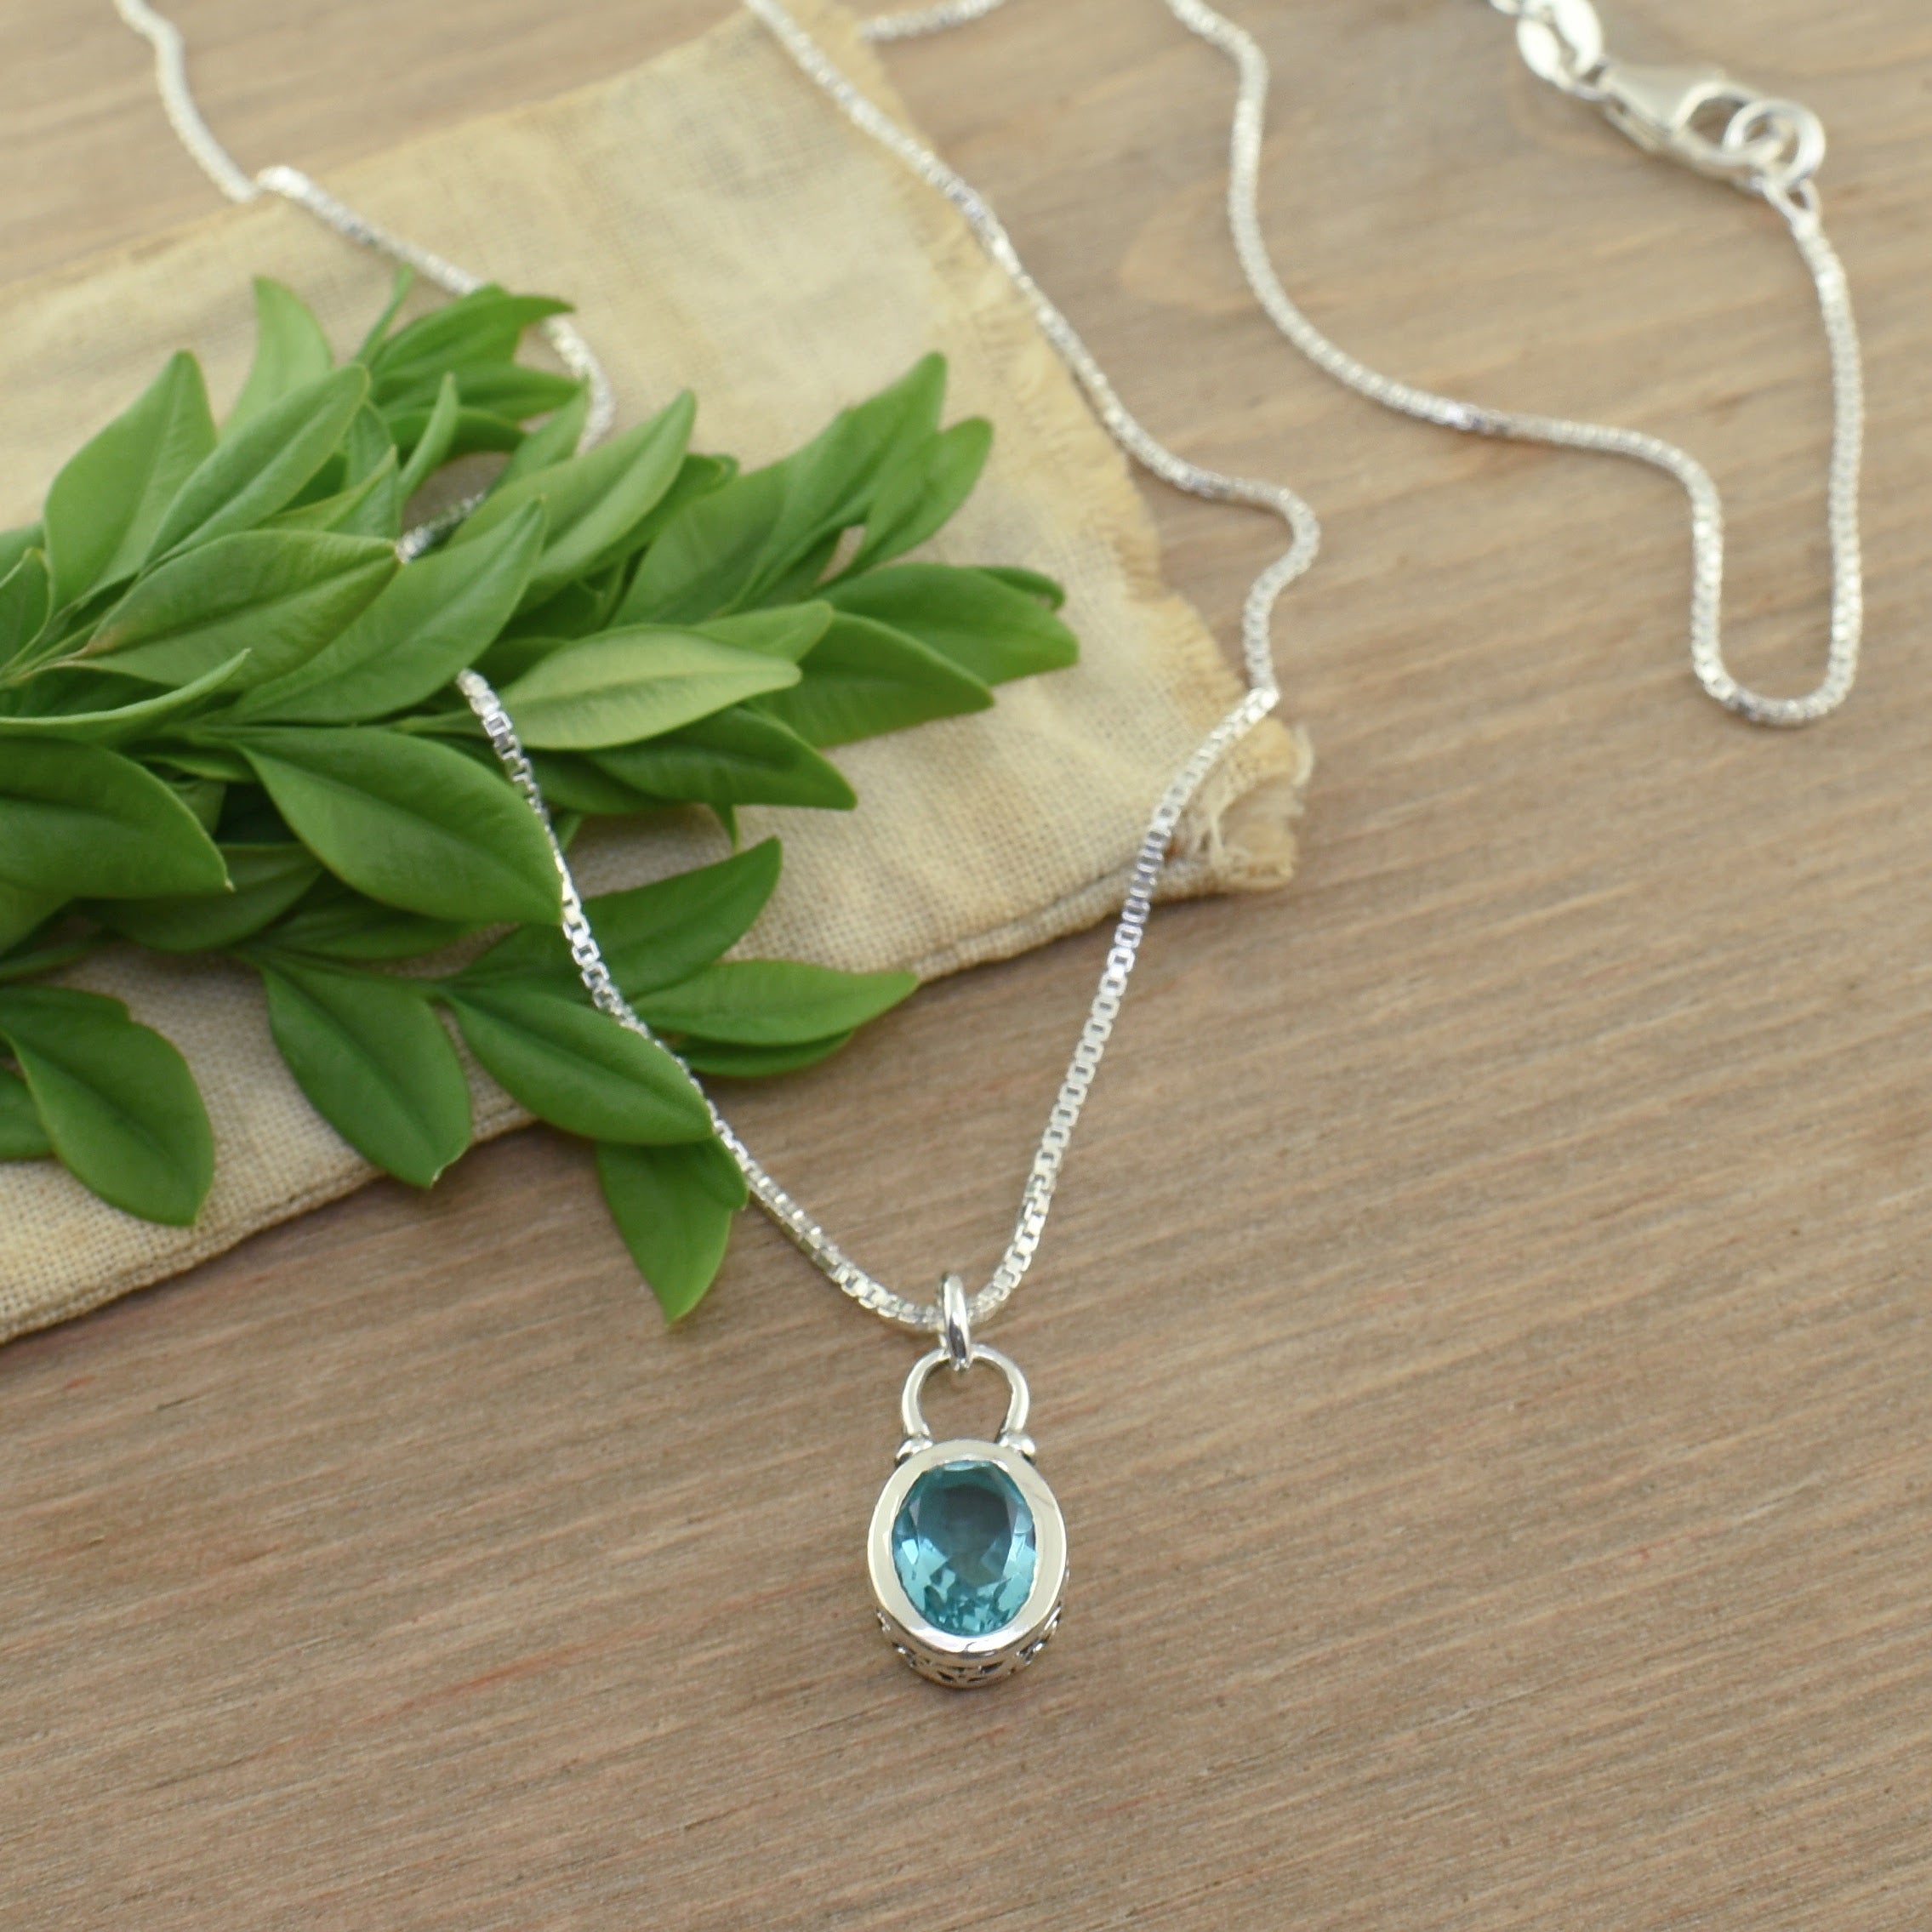 .925 sterling silver necklace with teal oval stone